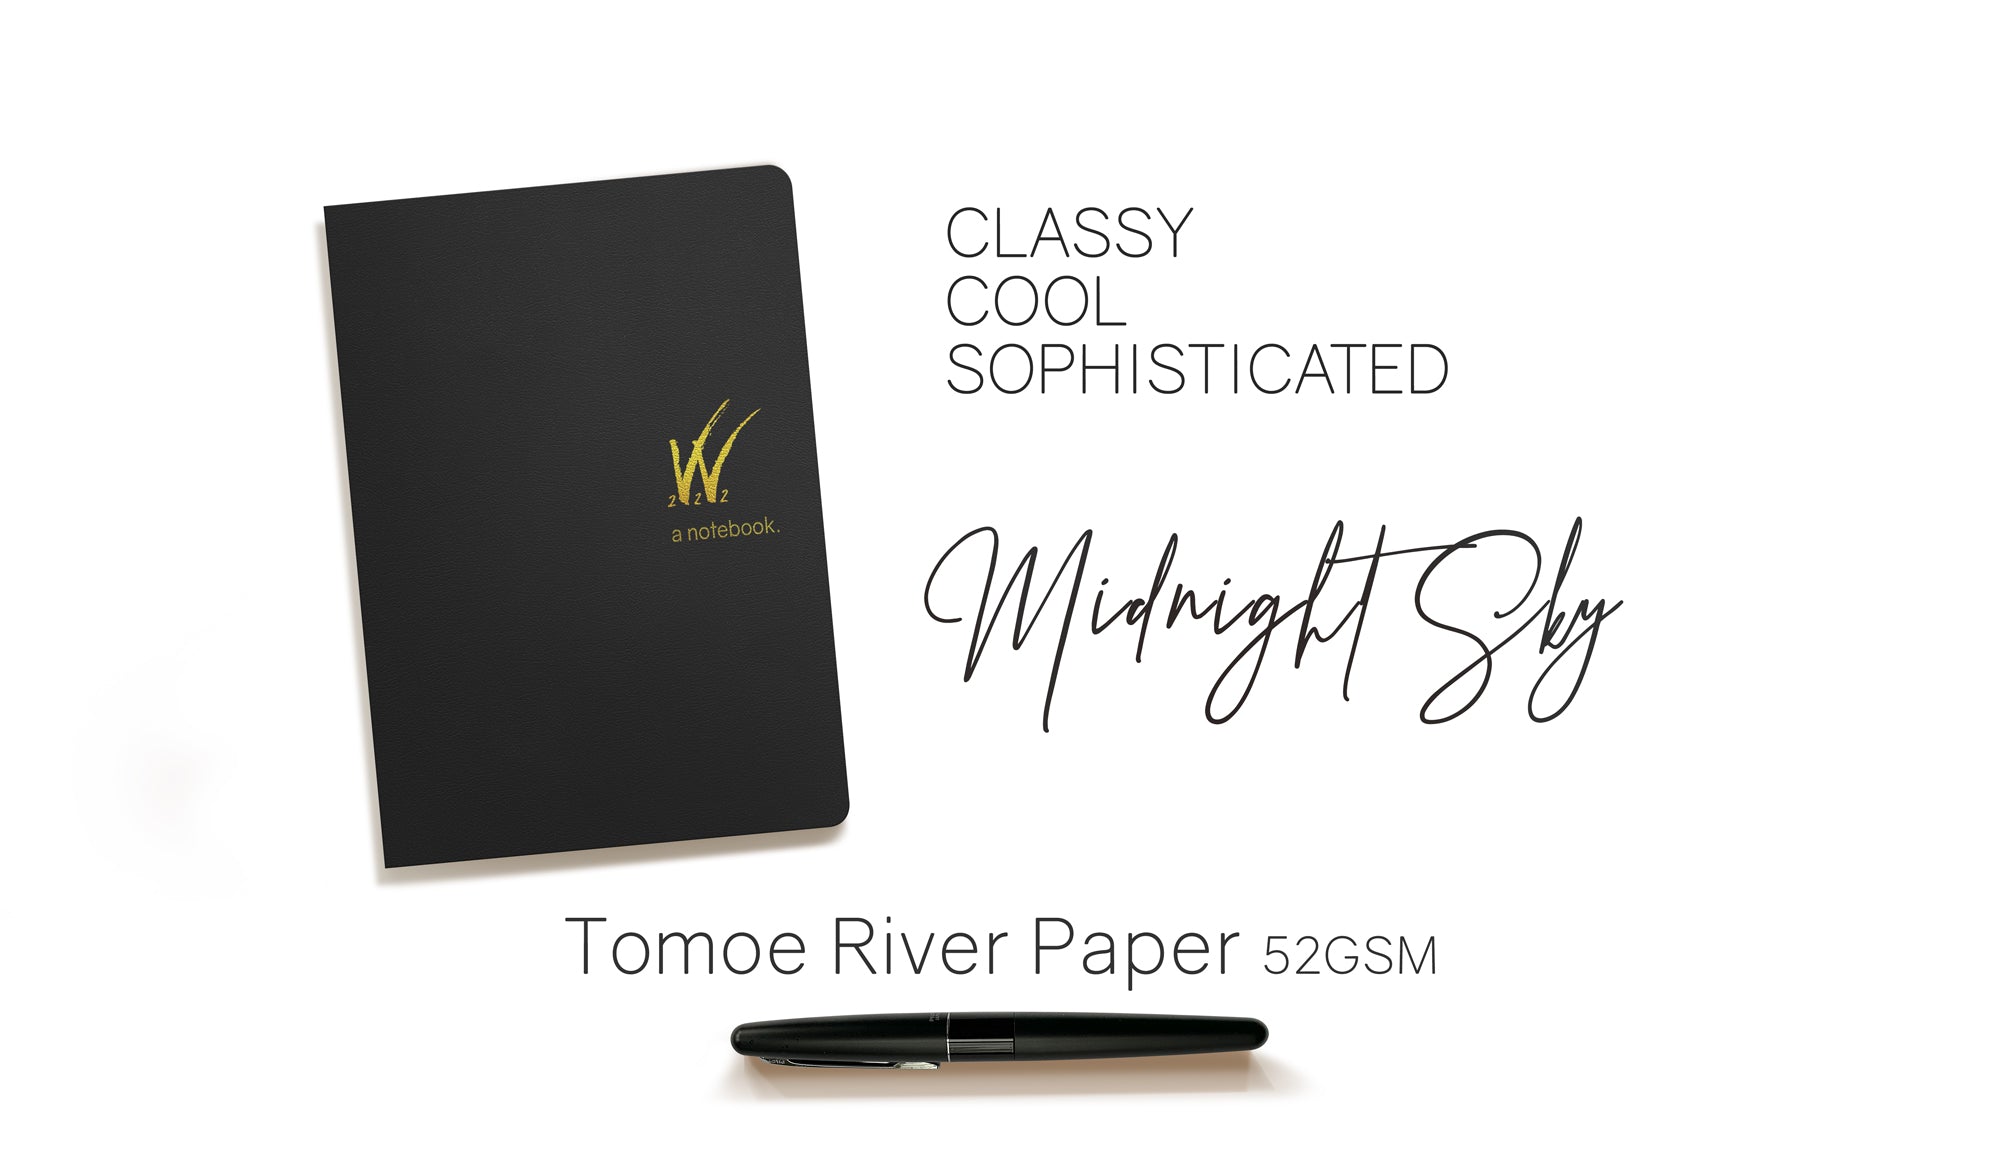 B6 52gsm Tomoe River Paper Notebook with black cover by Wonderland 222.  368 pages of smooth, ultra lightweight fountain pen friendly Tomoe River Paper.